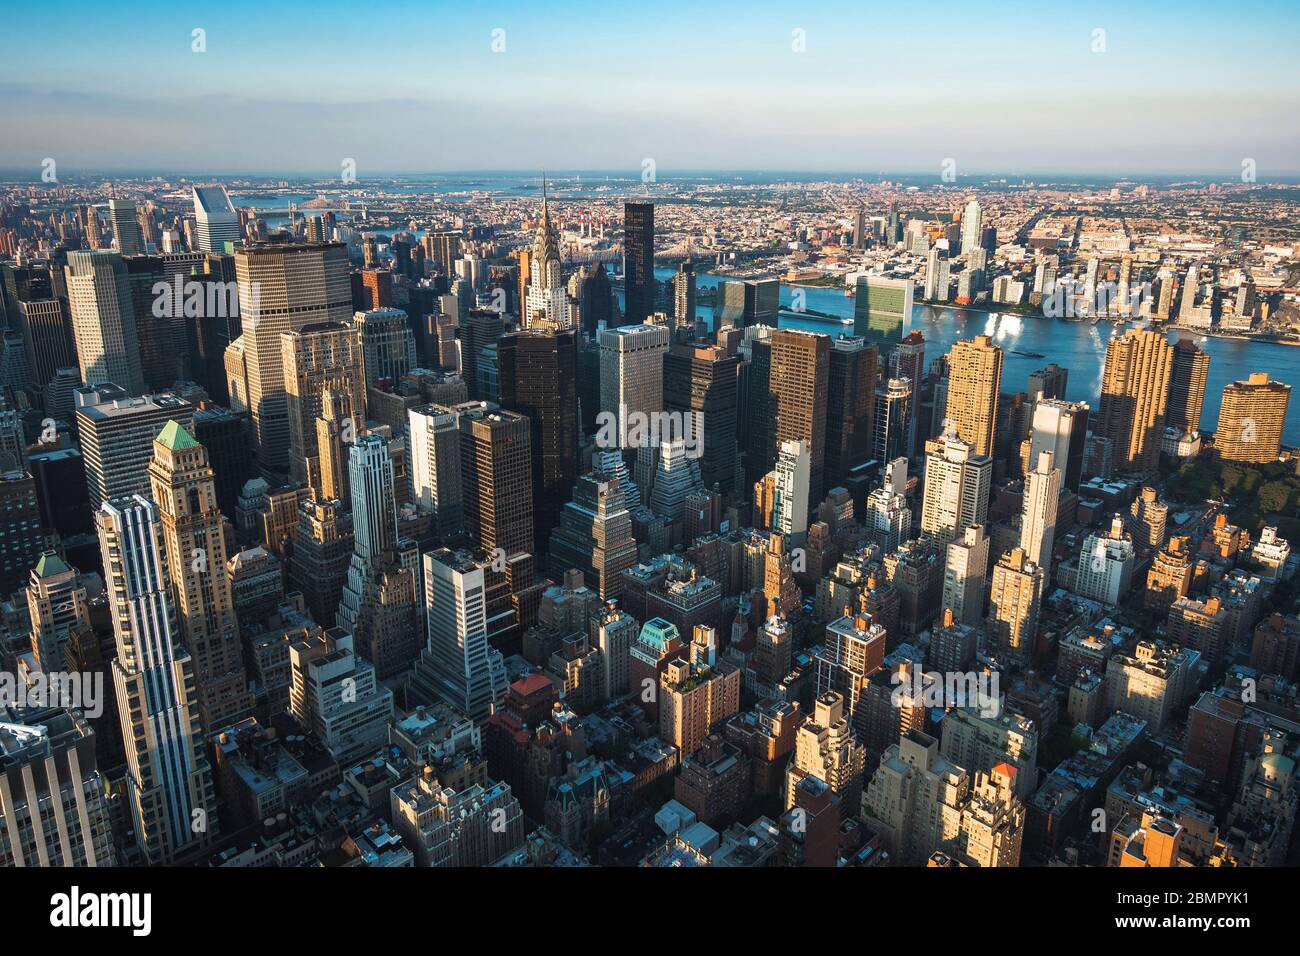 Skyline of New York City showing landmark buildings by day in New York, United States of America. Stock Photo